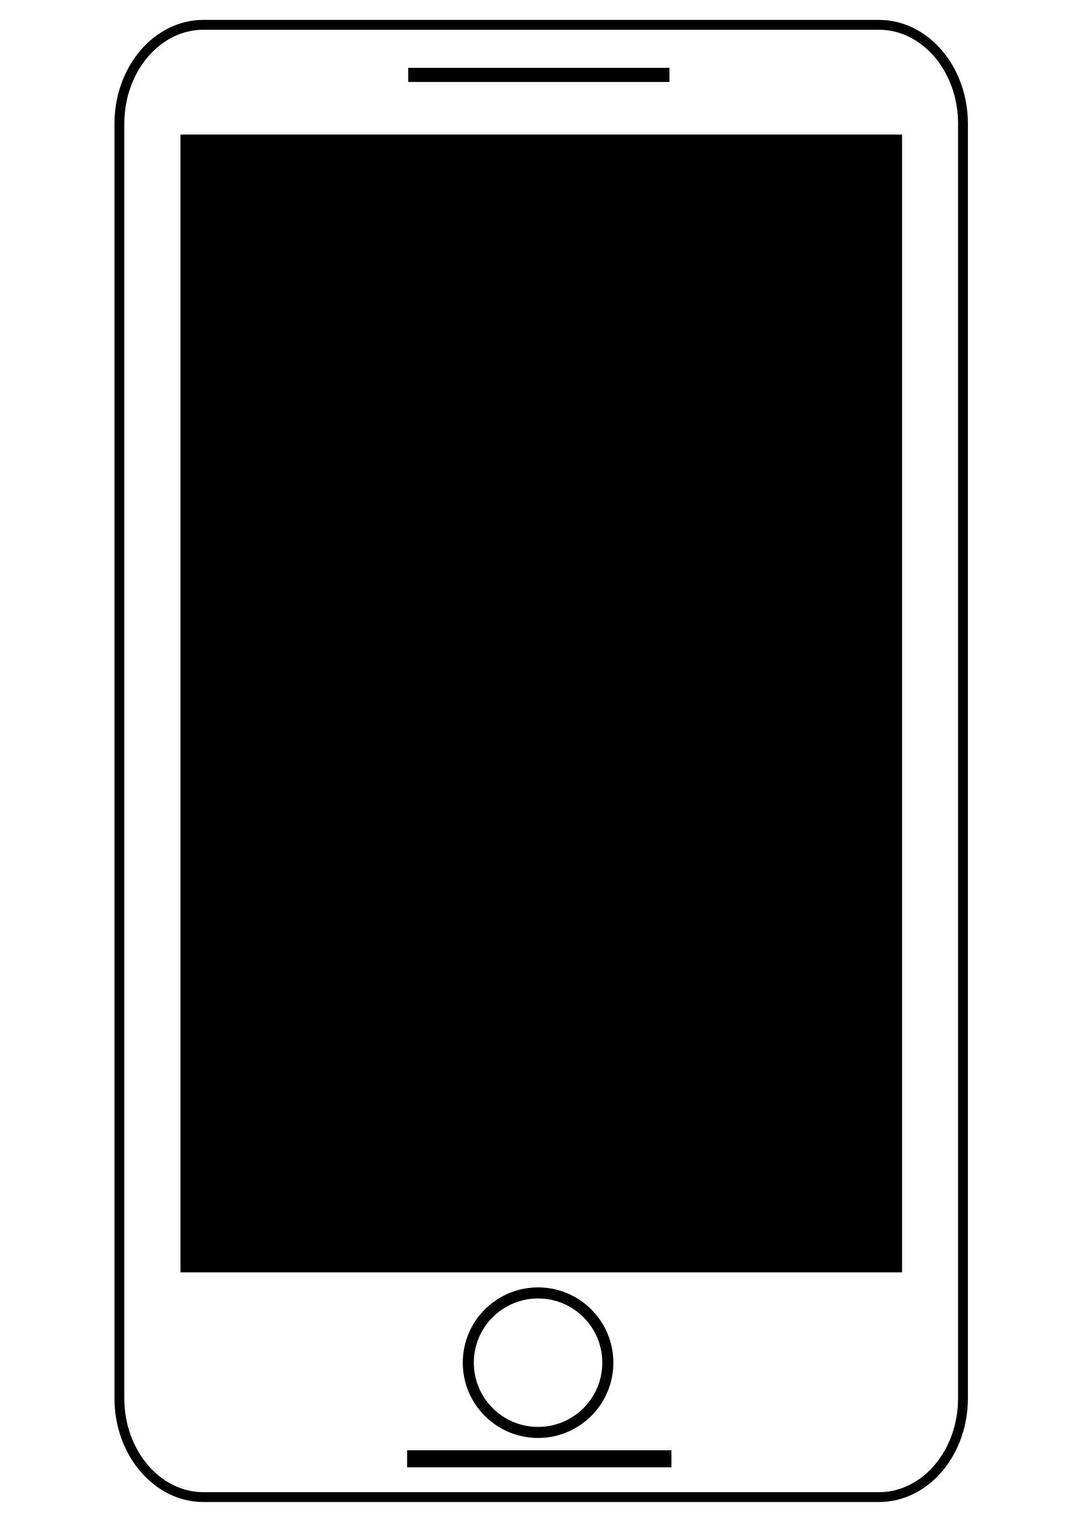 Animated Smart Phone Black And White - Free Download Clipart SVG png transparent